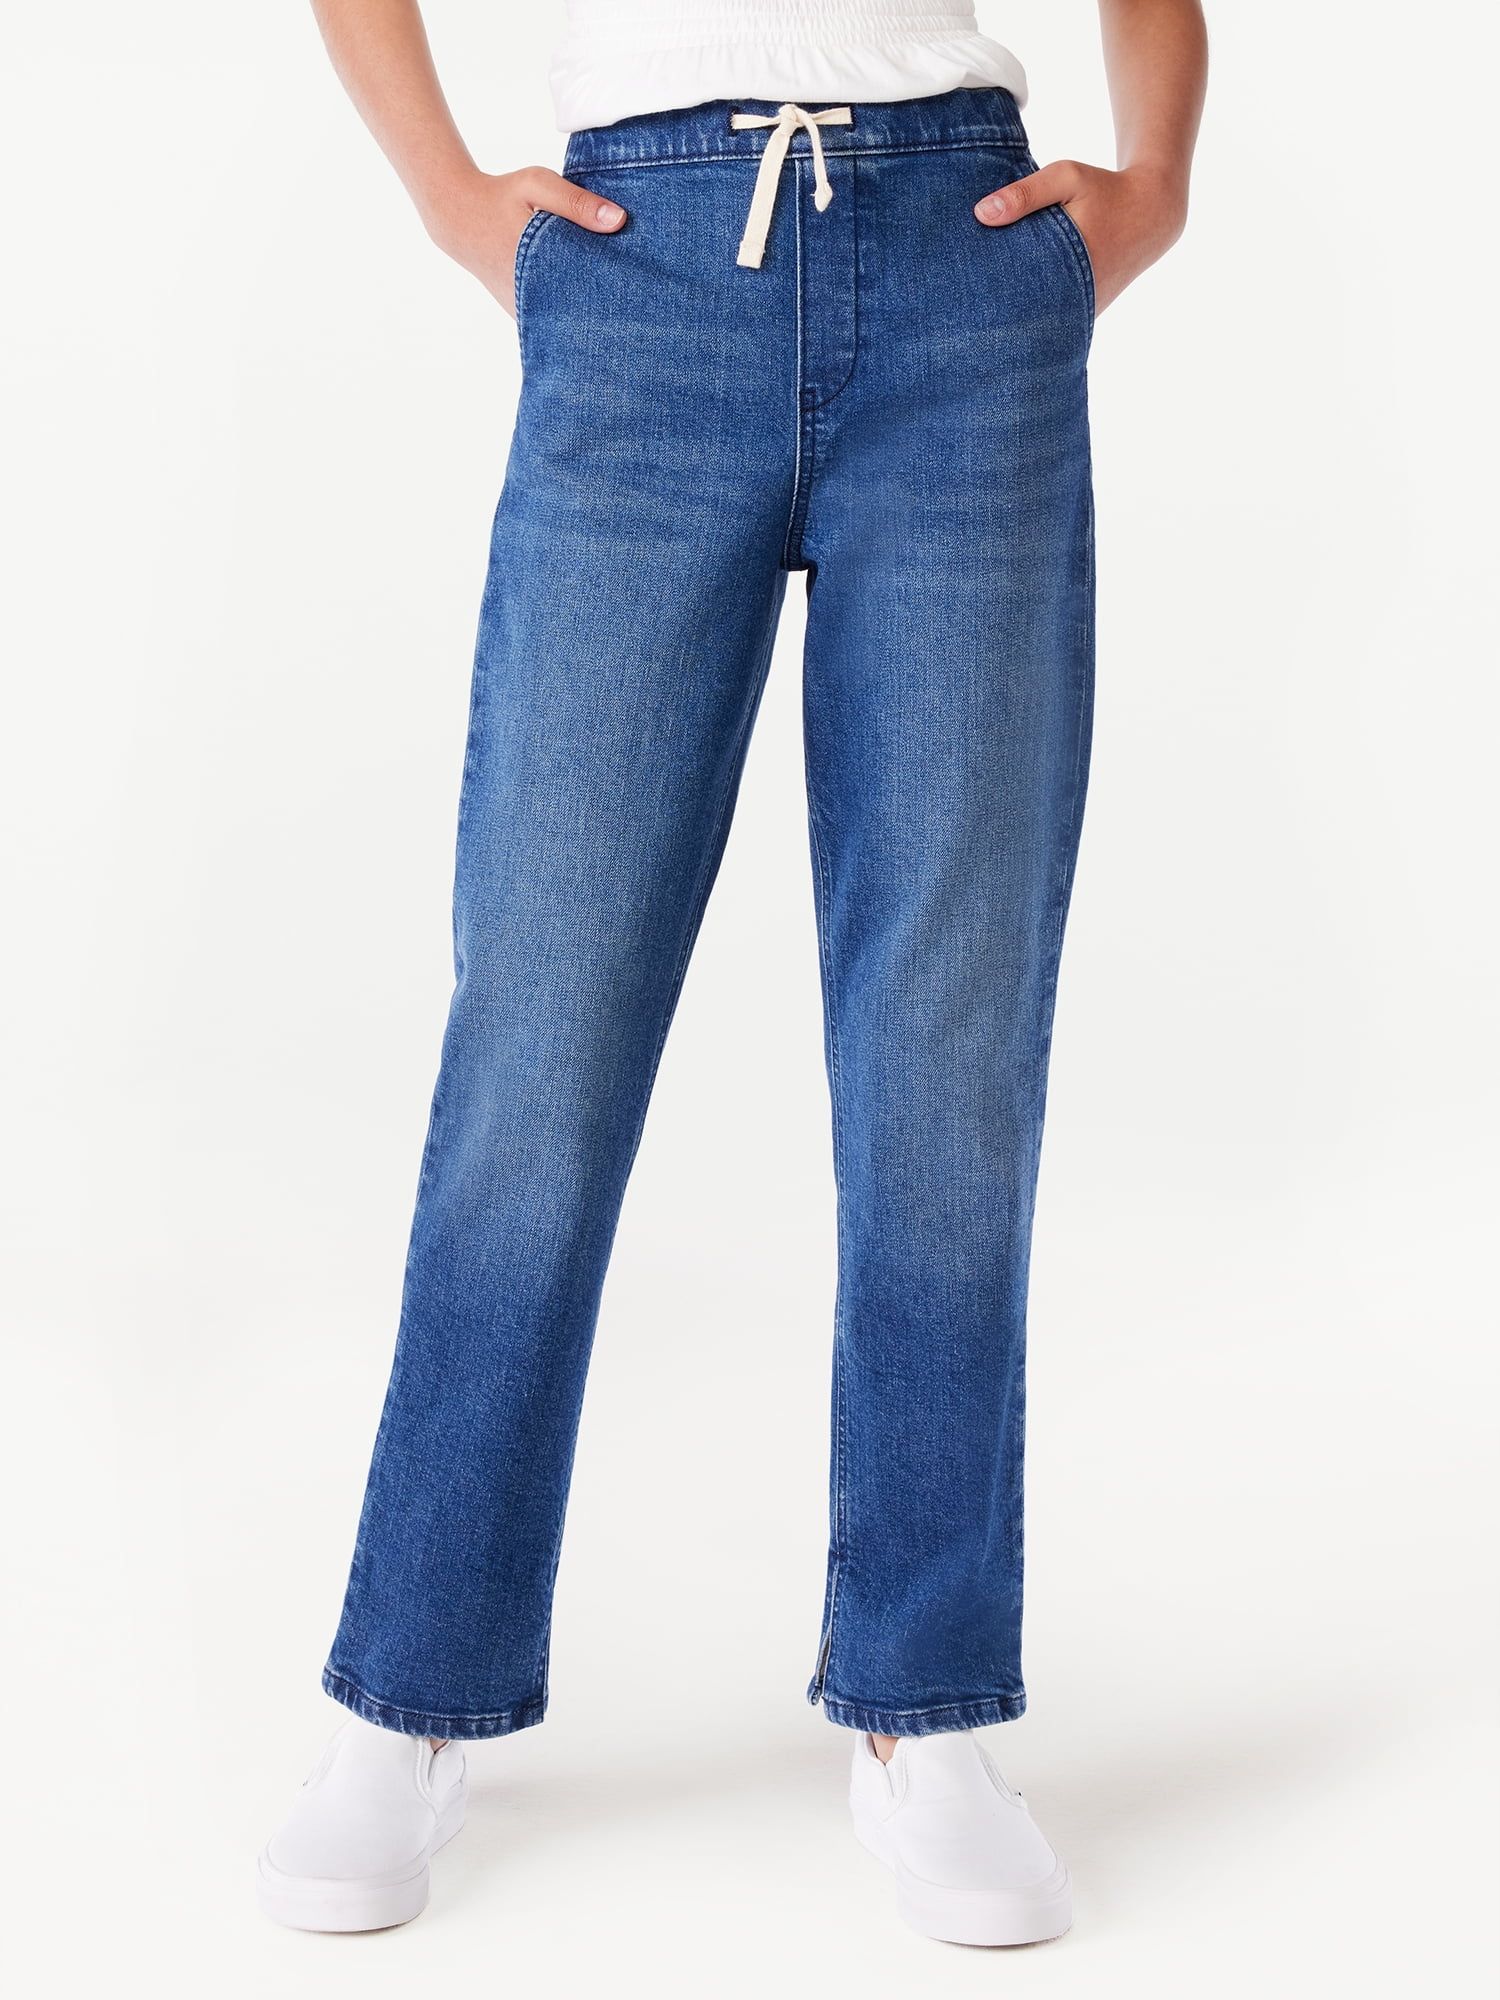 Free Assembly Girls Pull-On Jeans, Sizes 6-18 | Walmart (US)